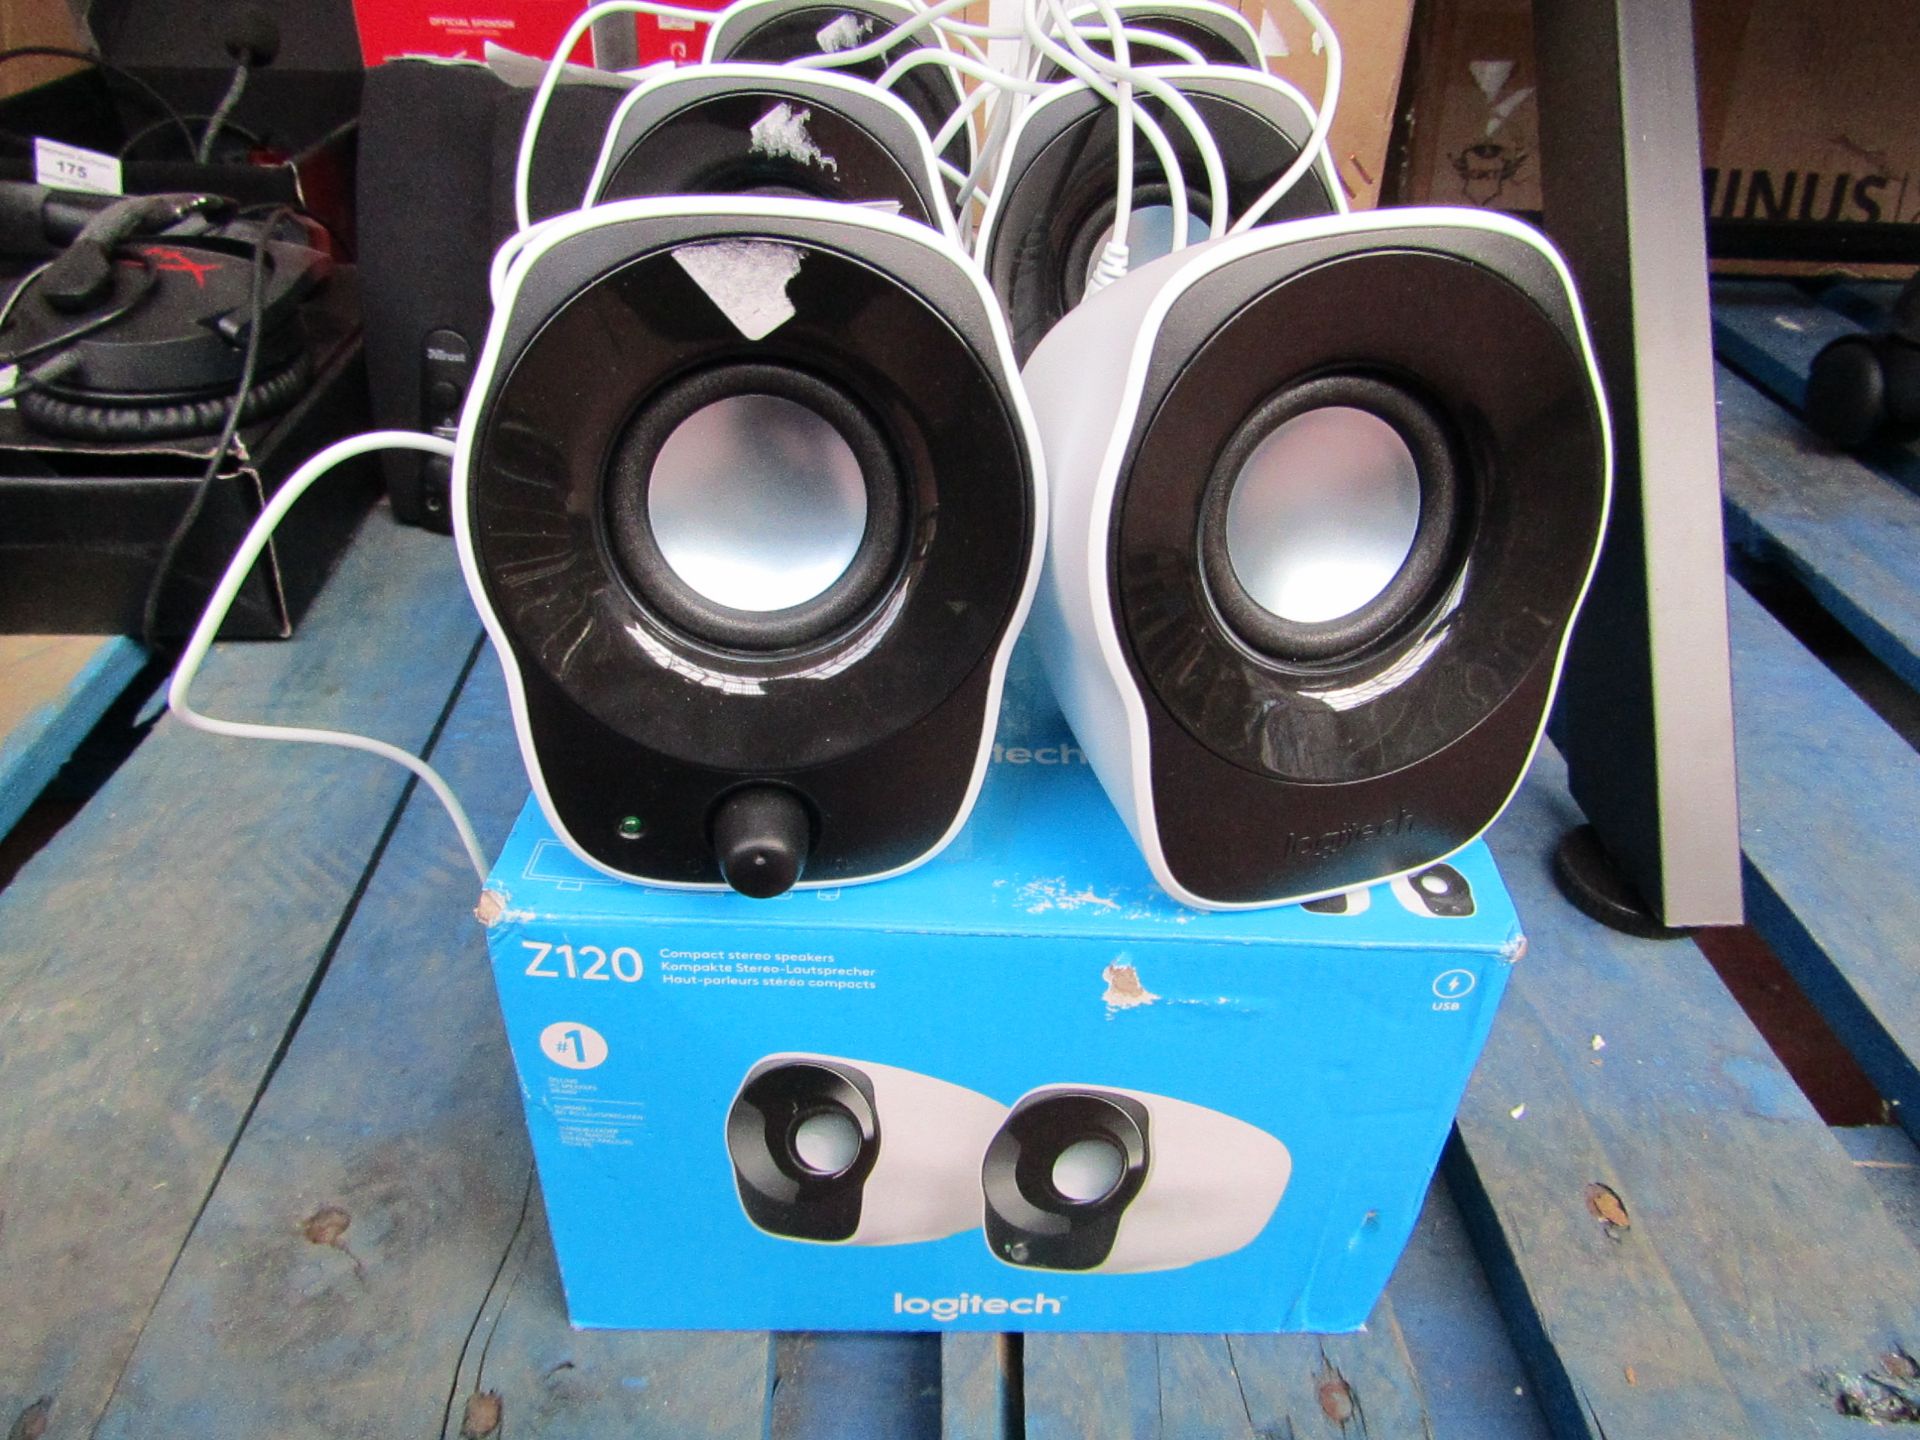 Logitech 2w compact stereo speakers, tested working and boxed.